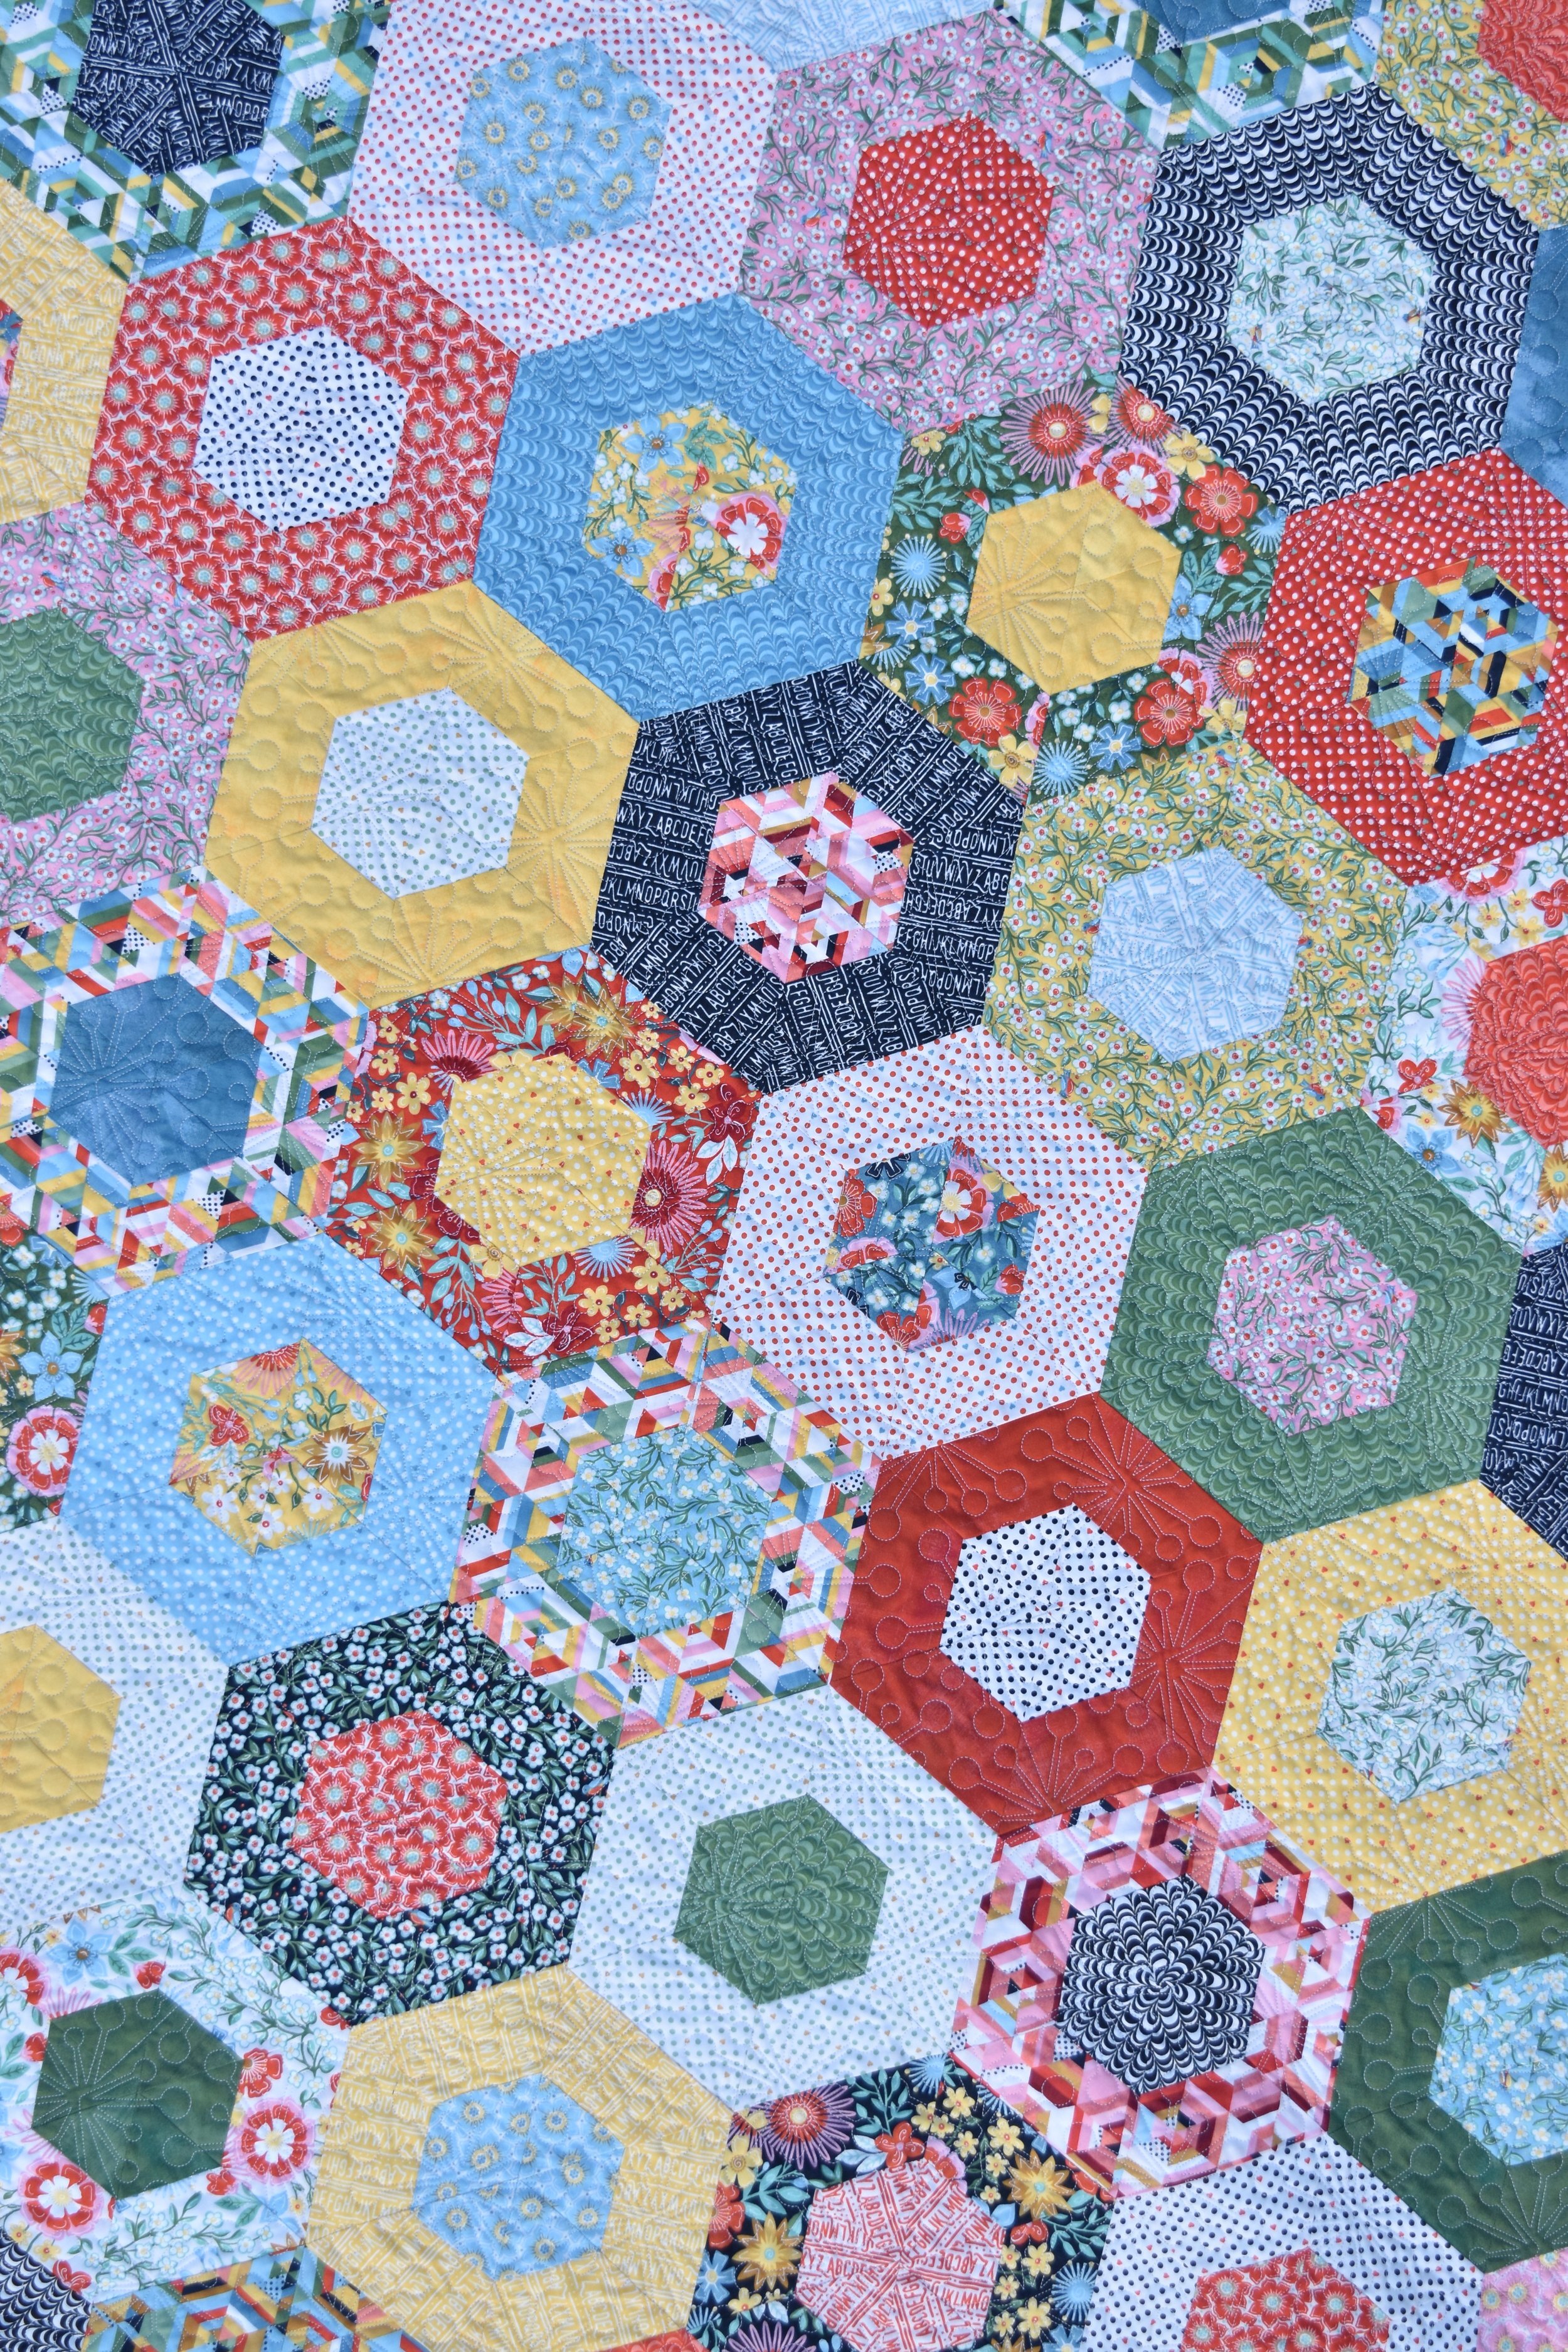 Jelly Roll Rug Class (Wheat Capital Quilt Society)